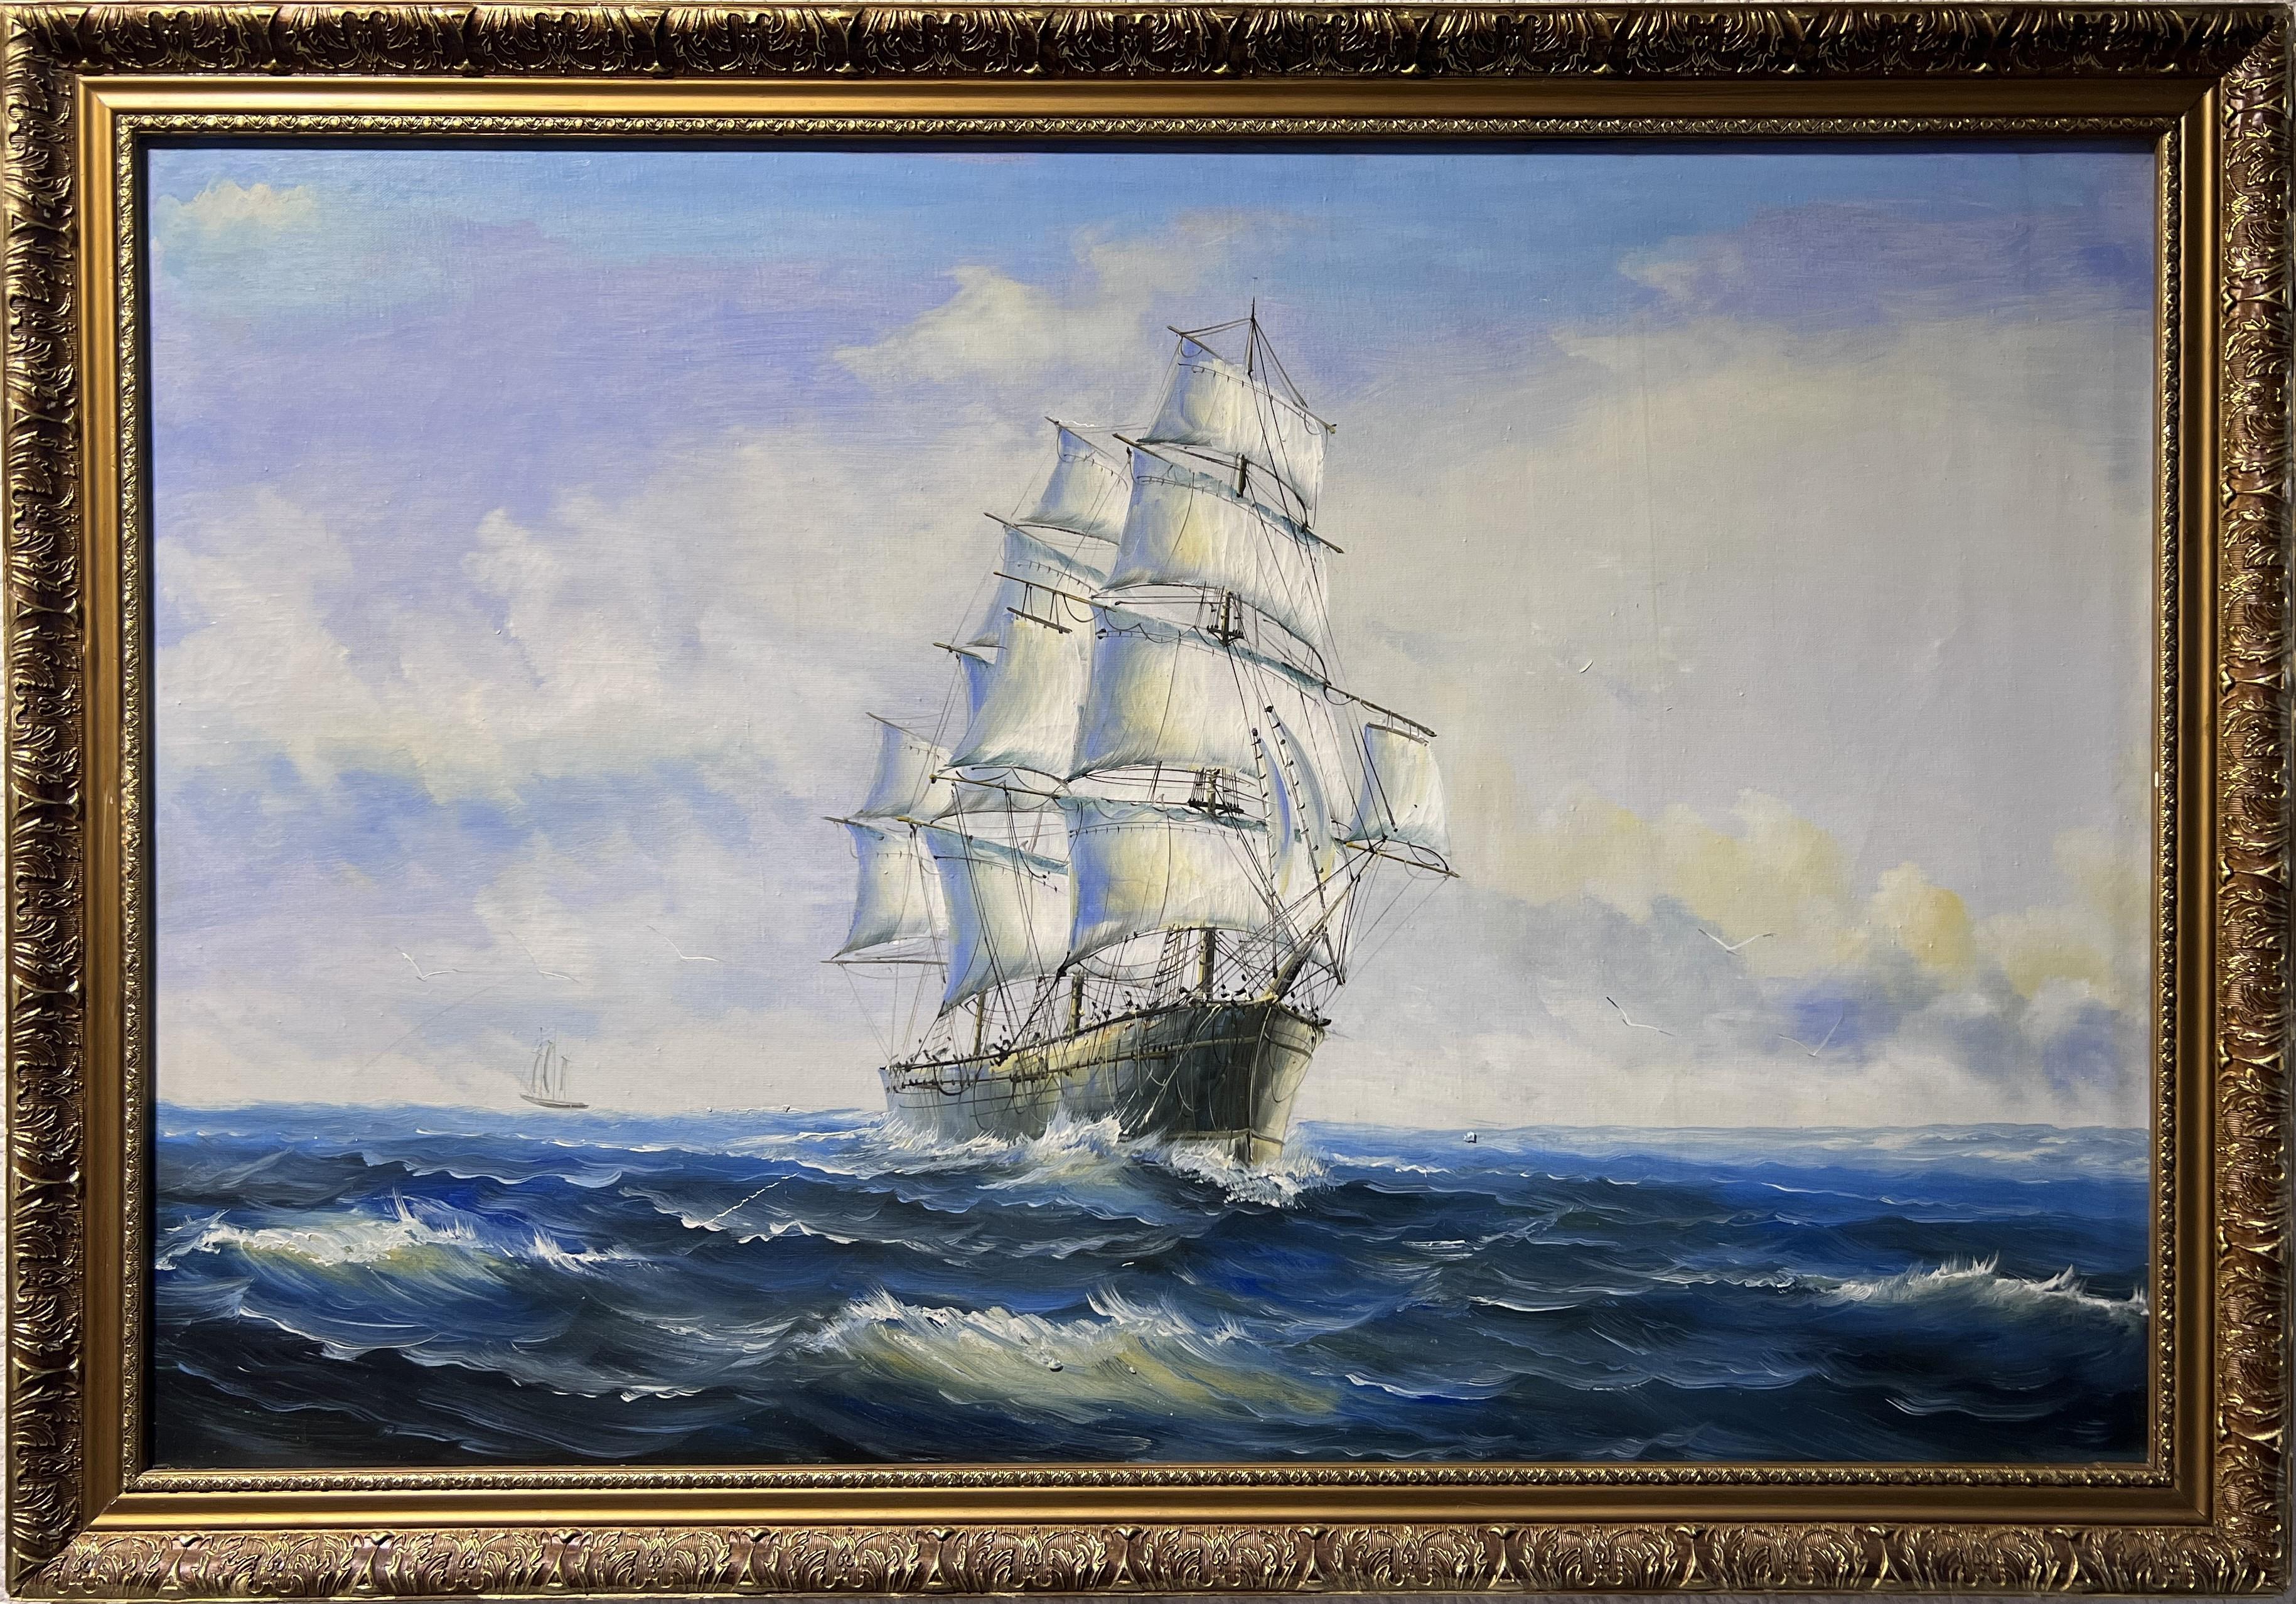 Unknown Landscape Painting - Original Large oil painting on canvas Seascape, Clipper ship, Gold Frame